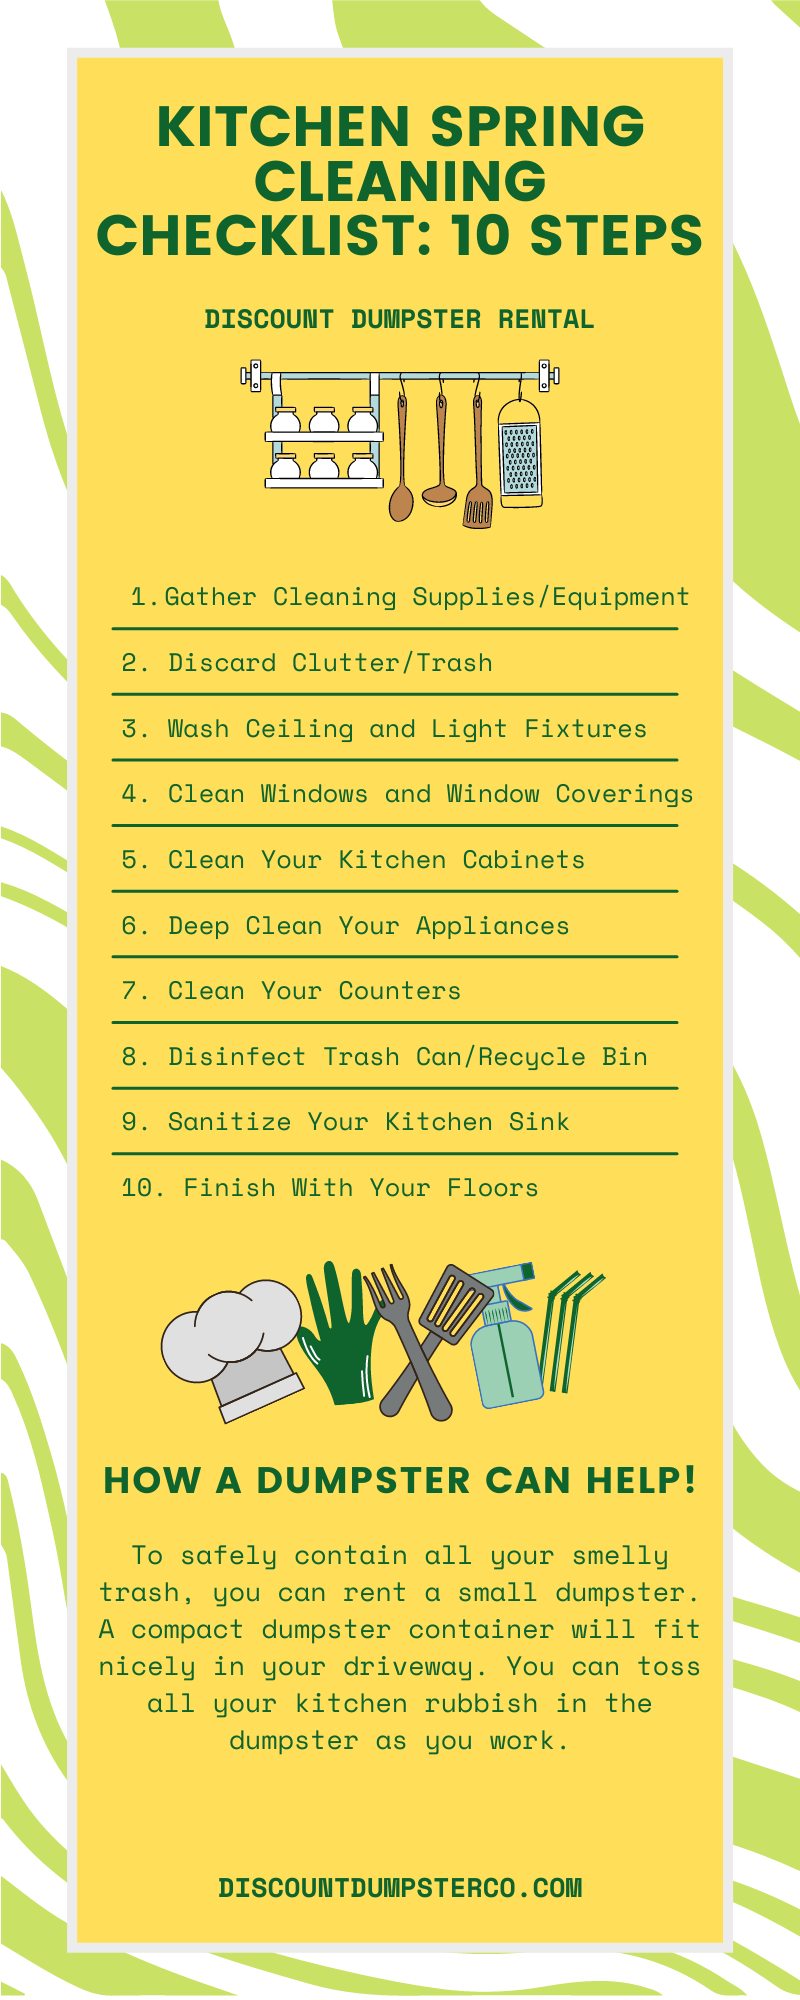 https://discountdumpsterco.com/wp-content/uploads/Kitchen-Spring-Cleaning-Checklist-10-Steps-Infographic.png